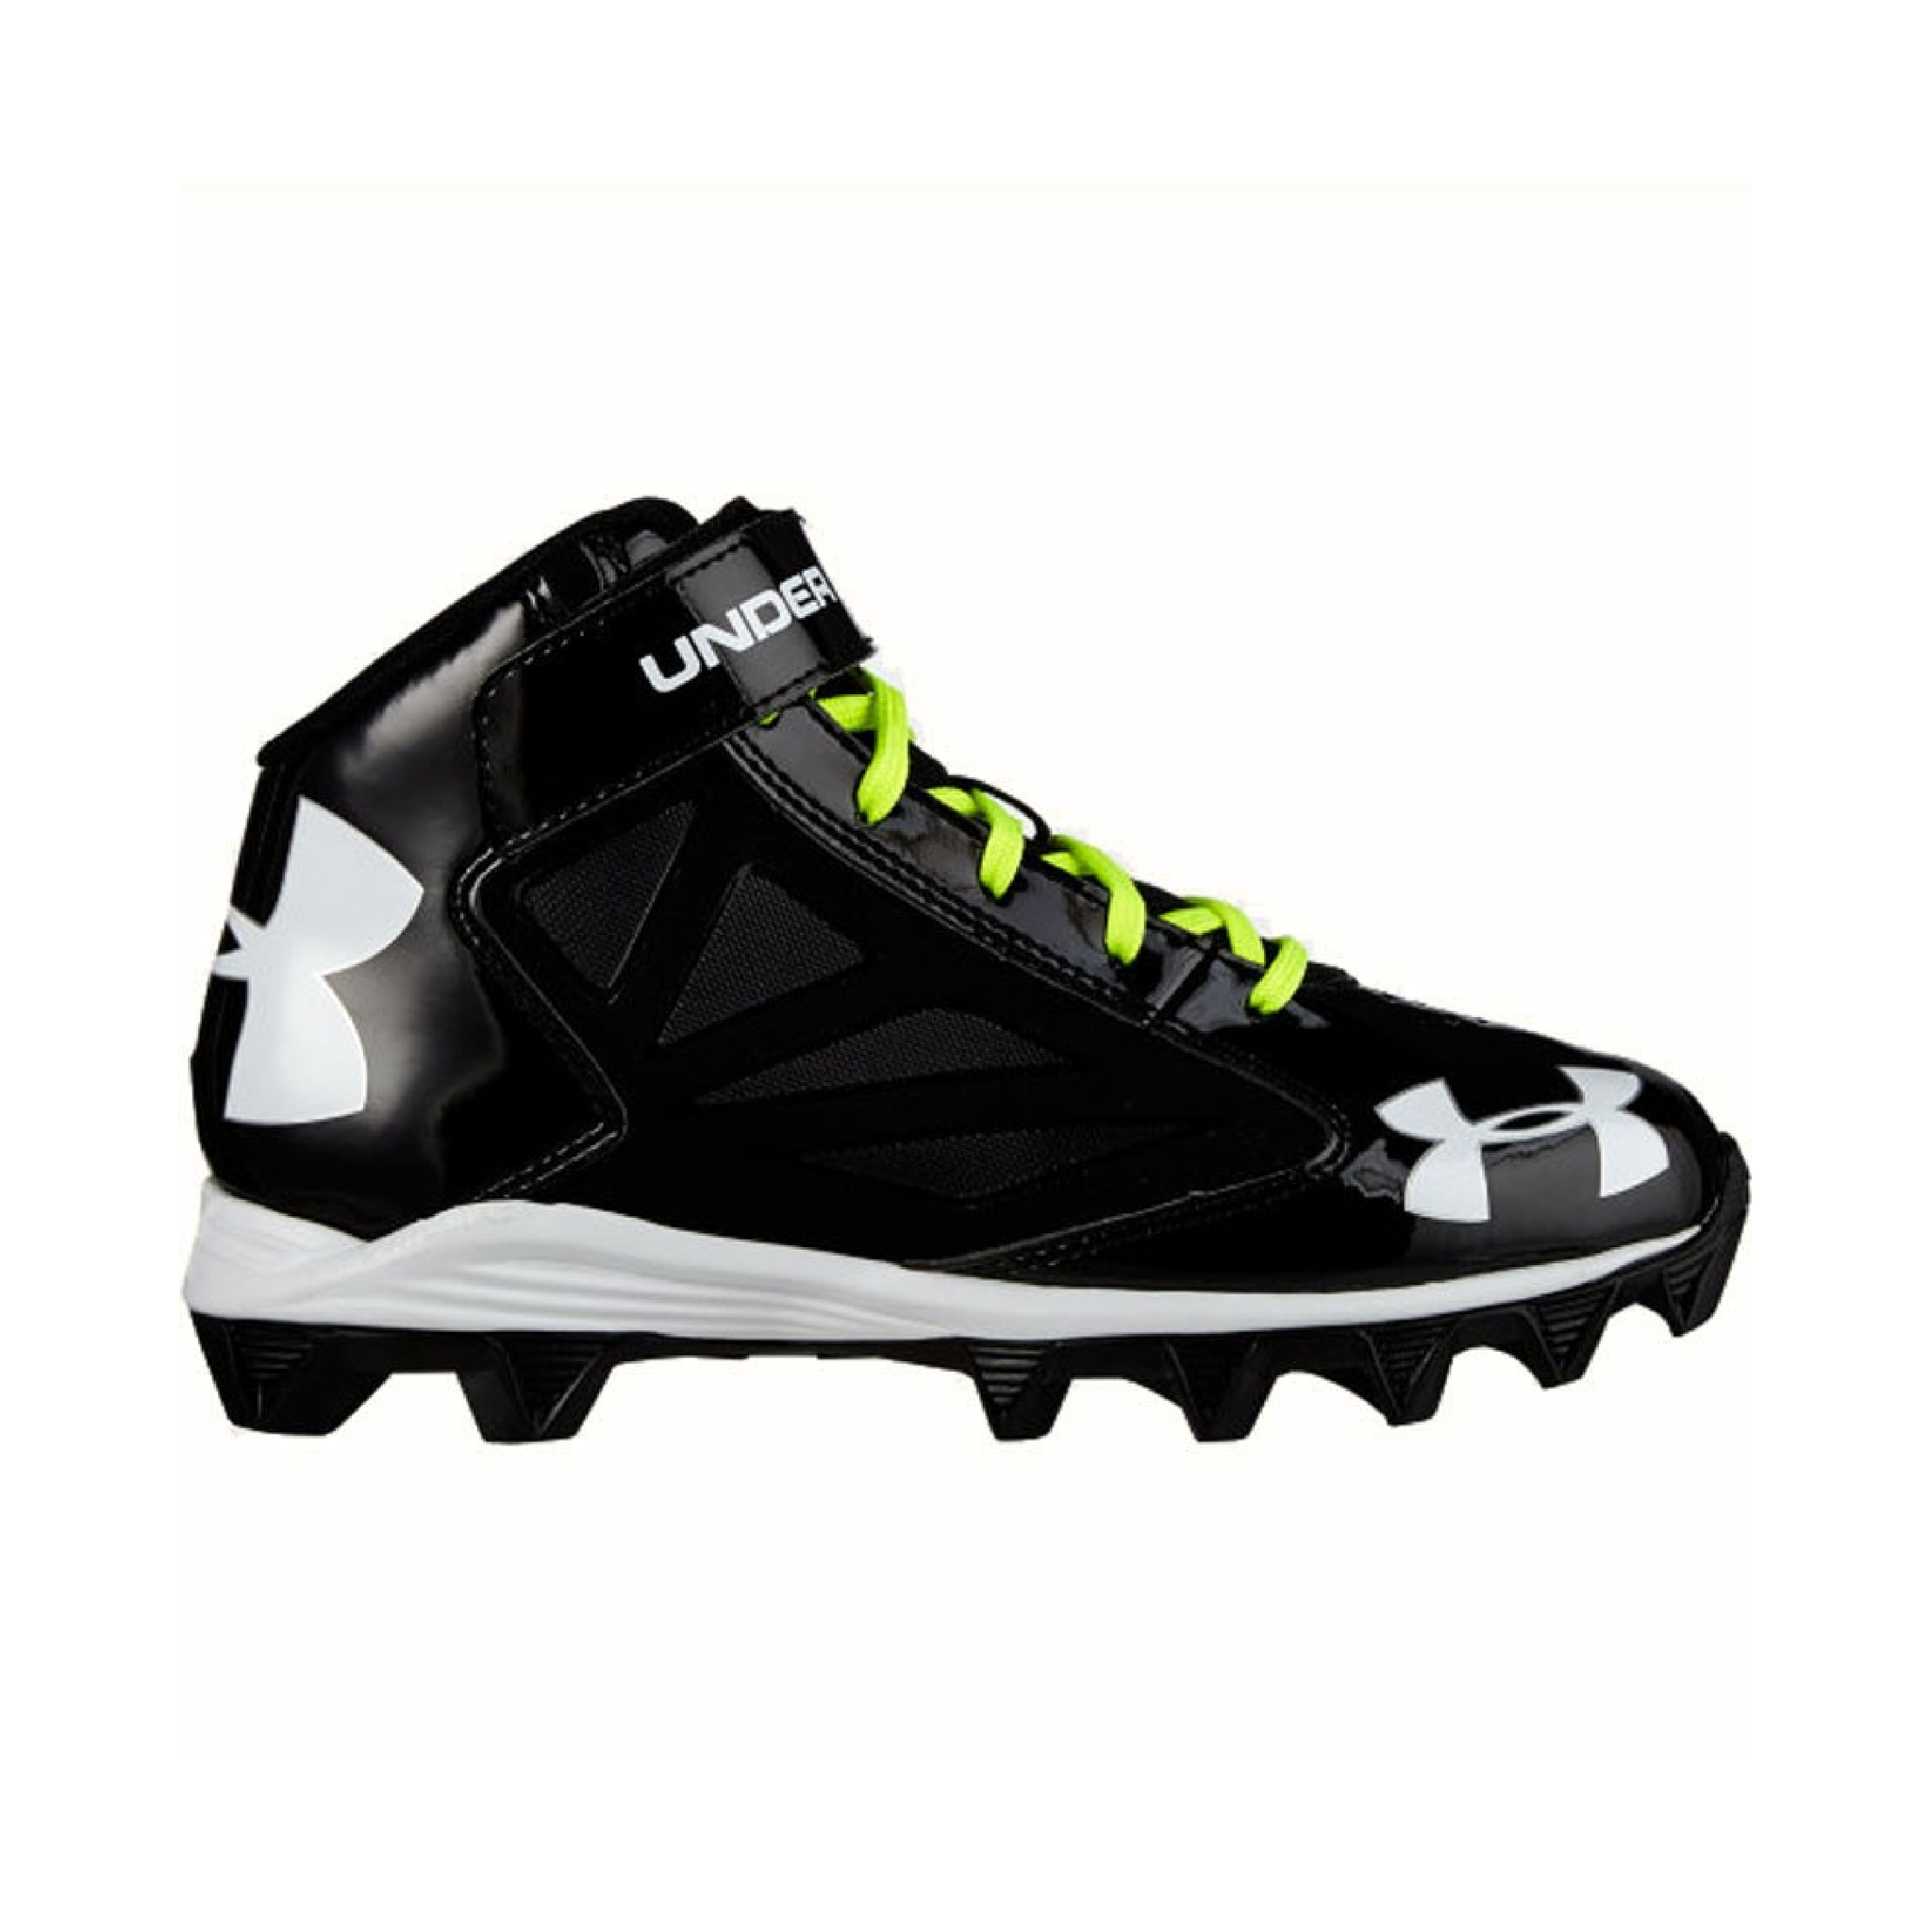 Under Armour Boy's Crusher Football Cleats